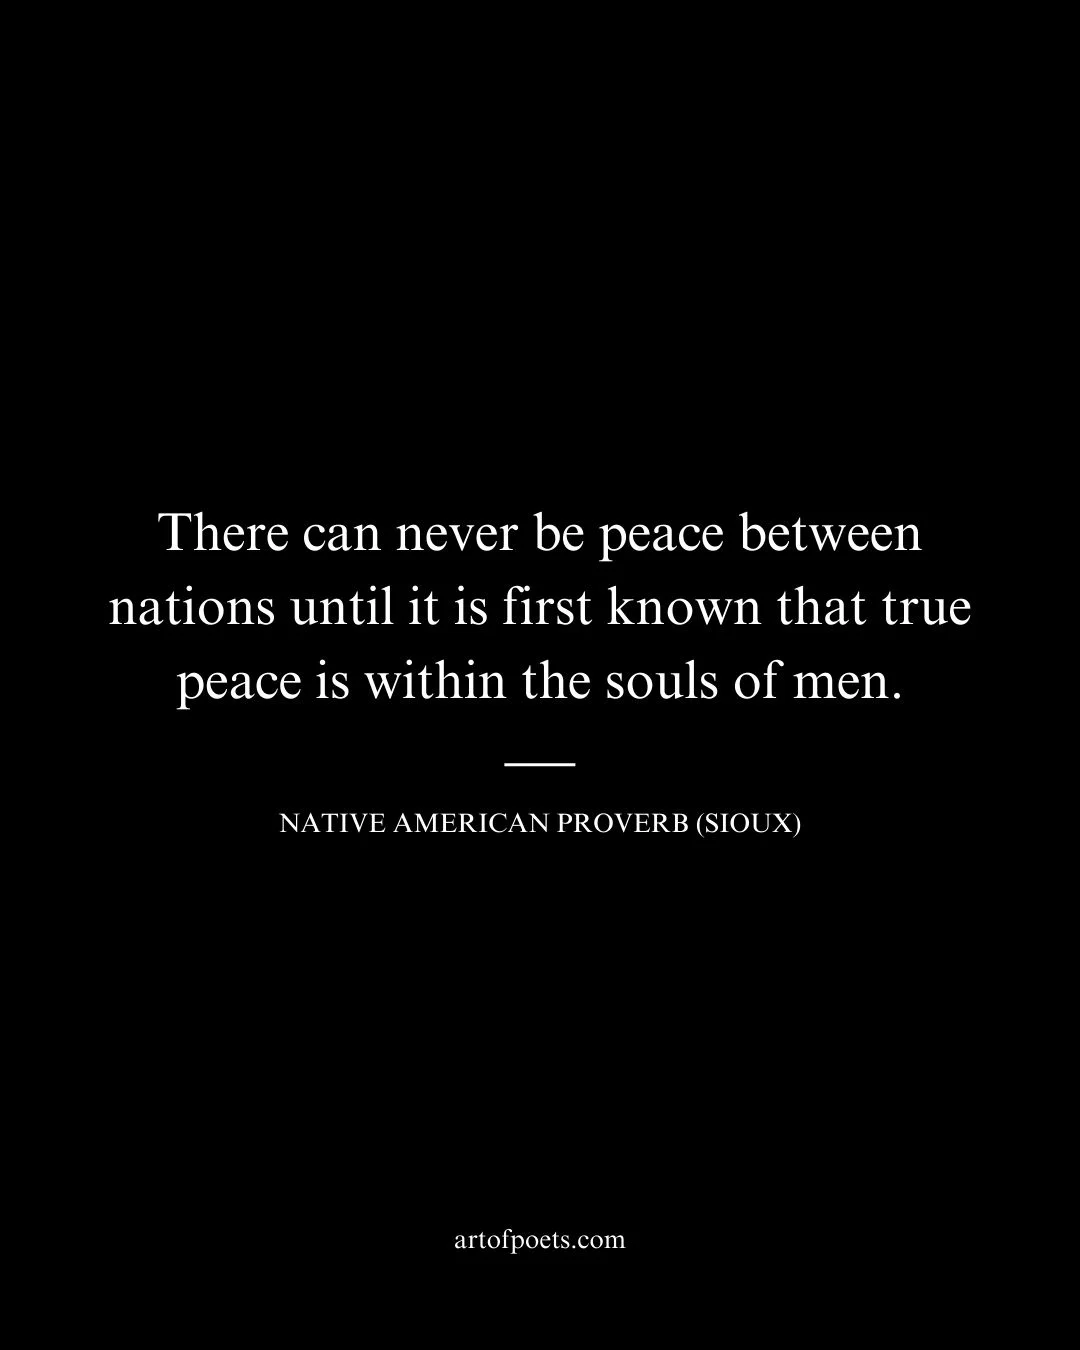 There can never be peace between nations until it is first known that true peace is within the souls of men